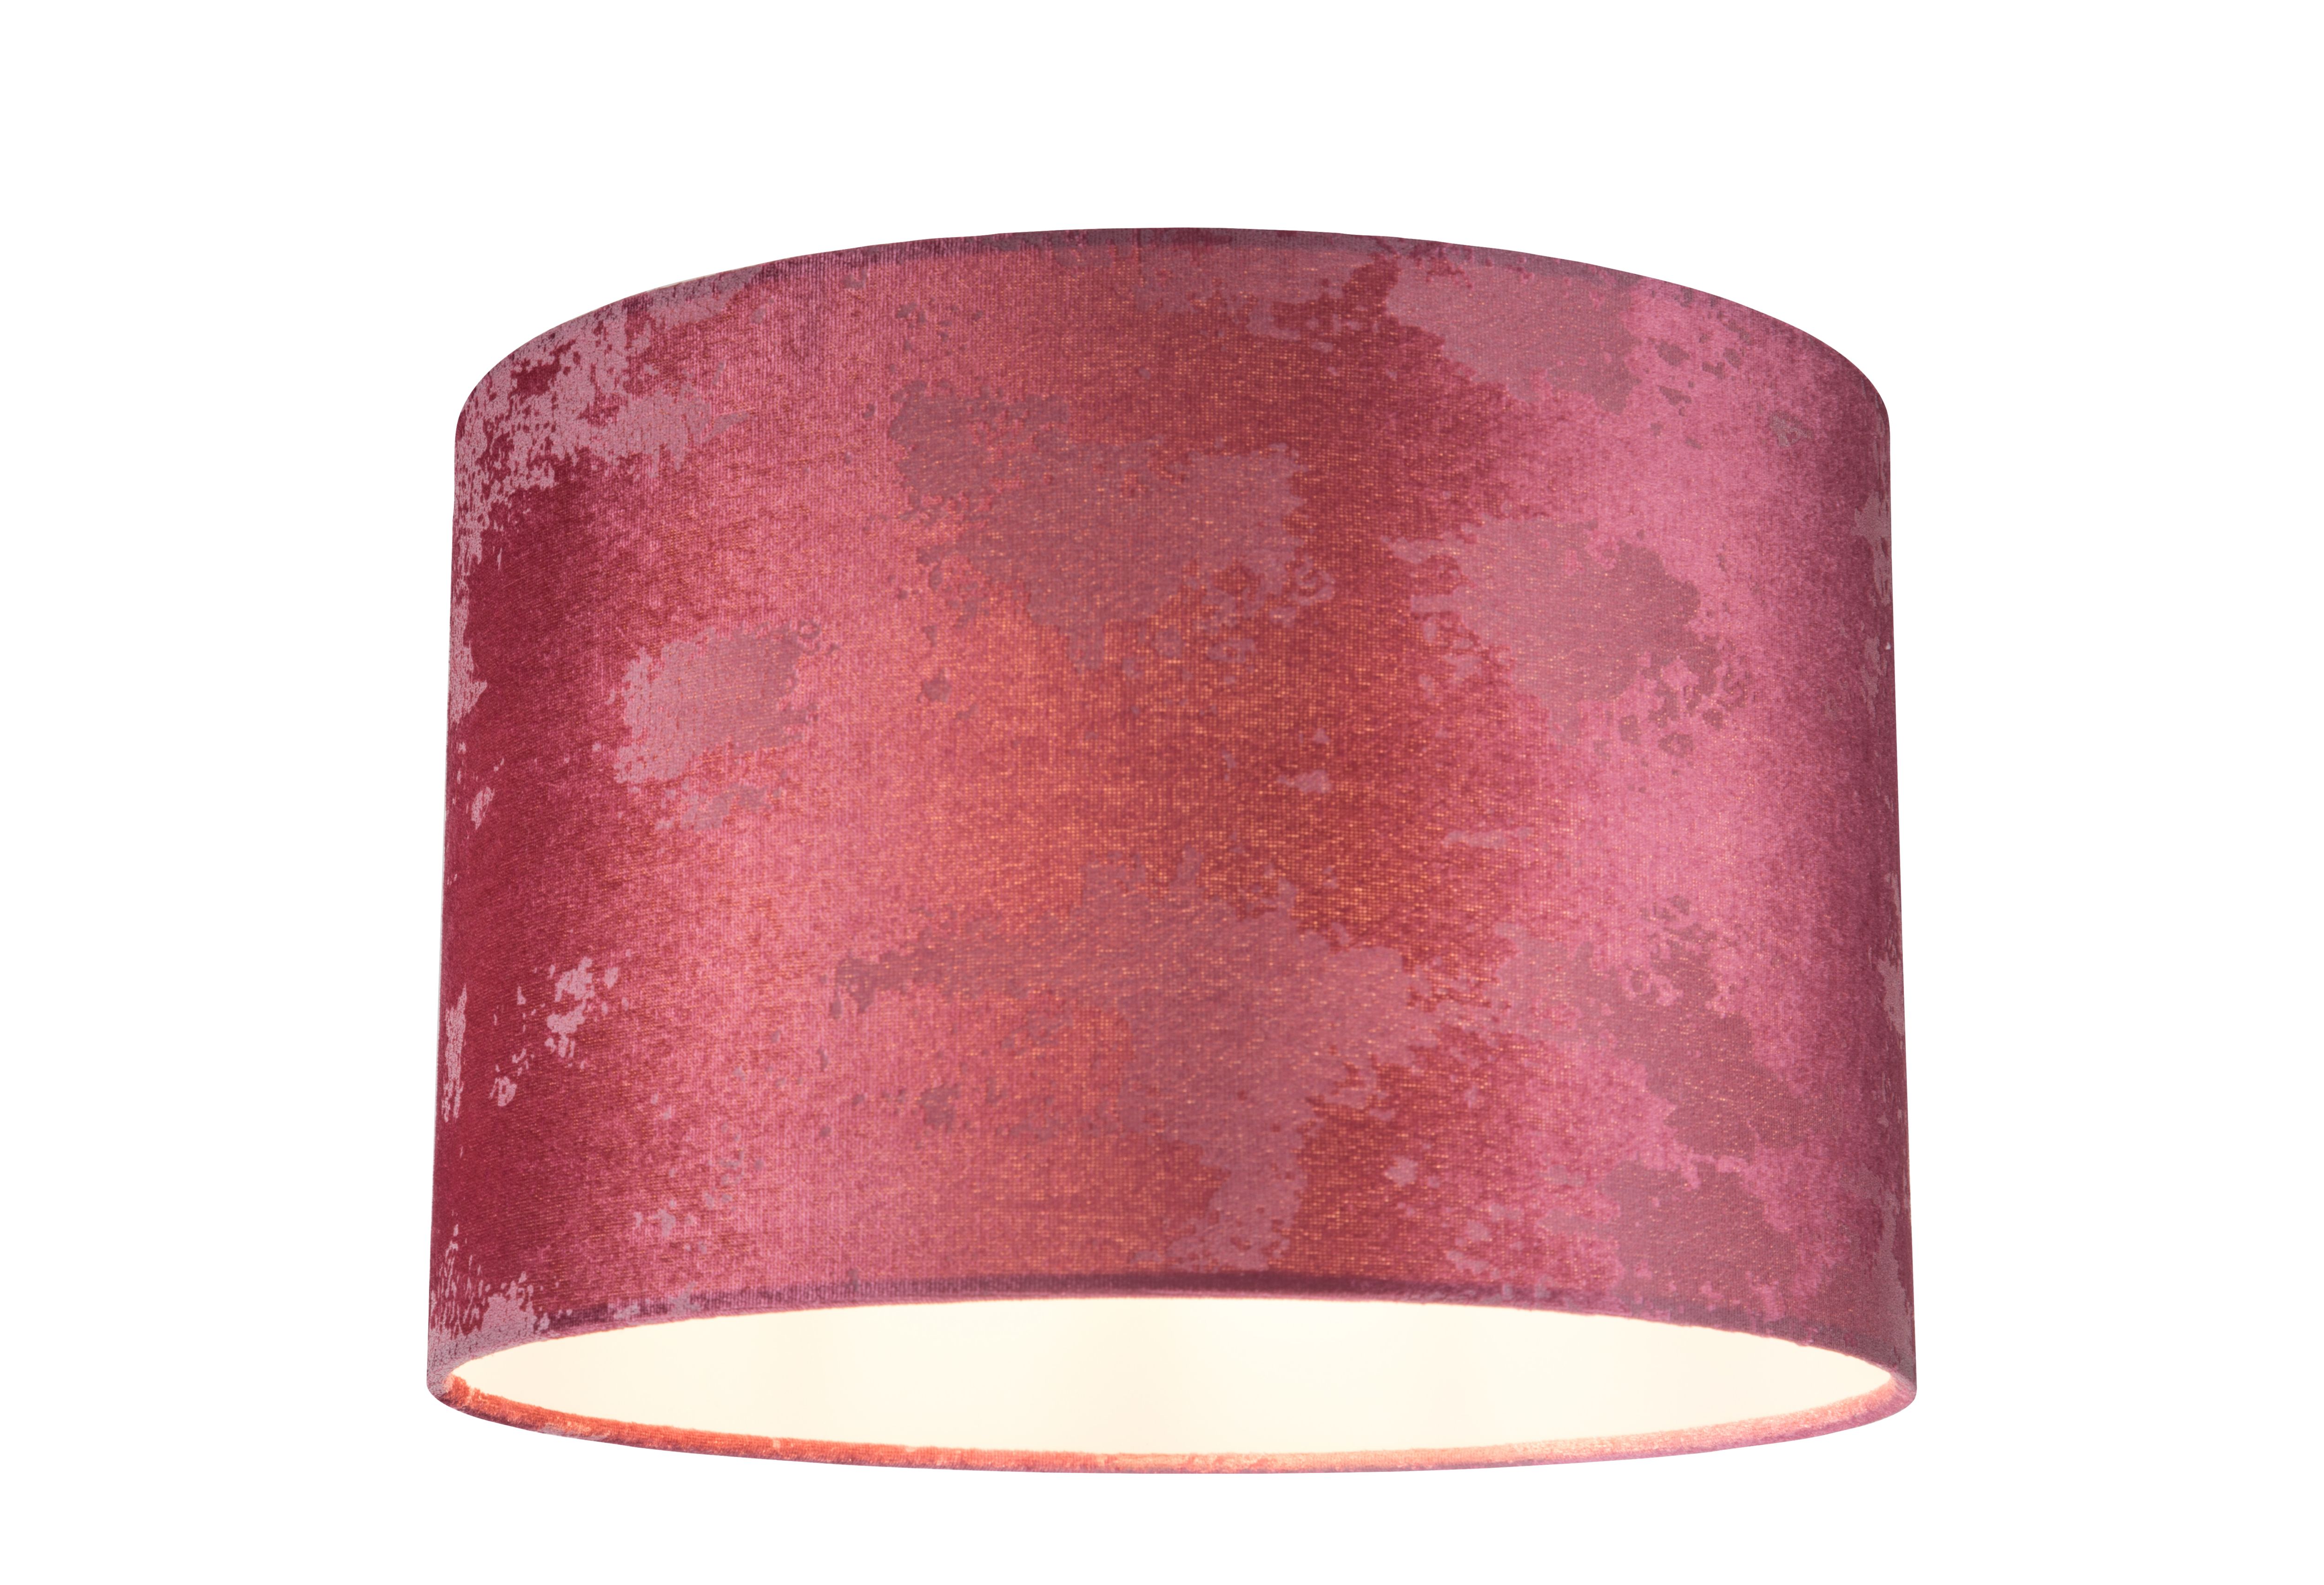 GoodHome Maltby Pink Round Lamp shade (D)30cm